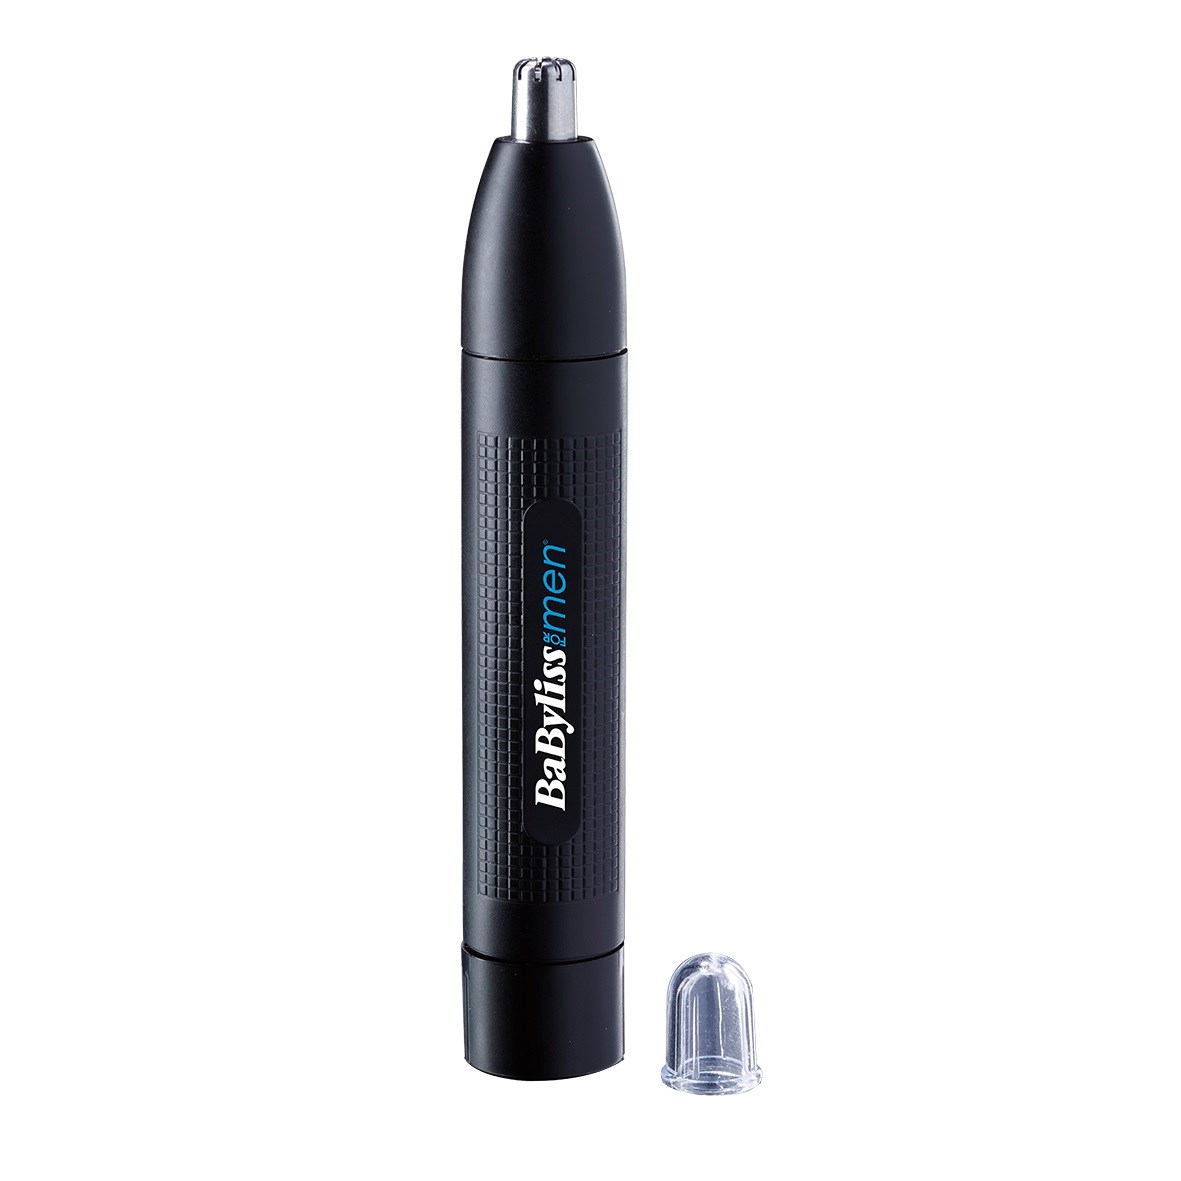 Babyliss for Men Multi Trimmer - Nose and Ear